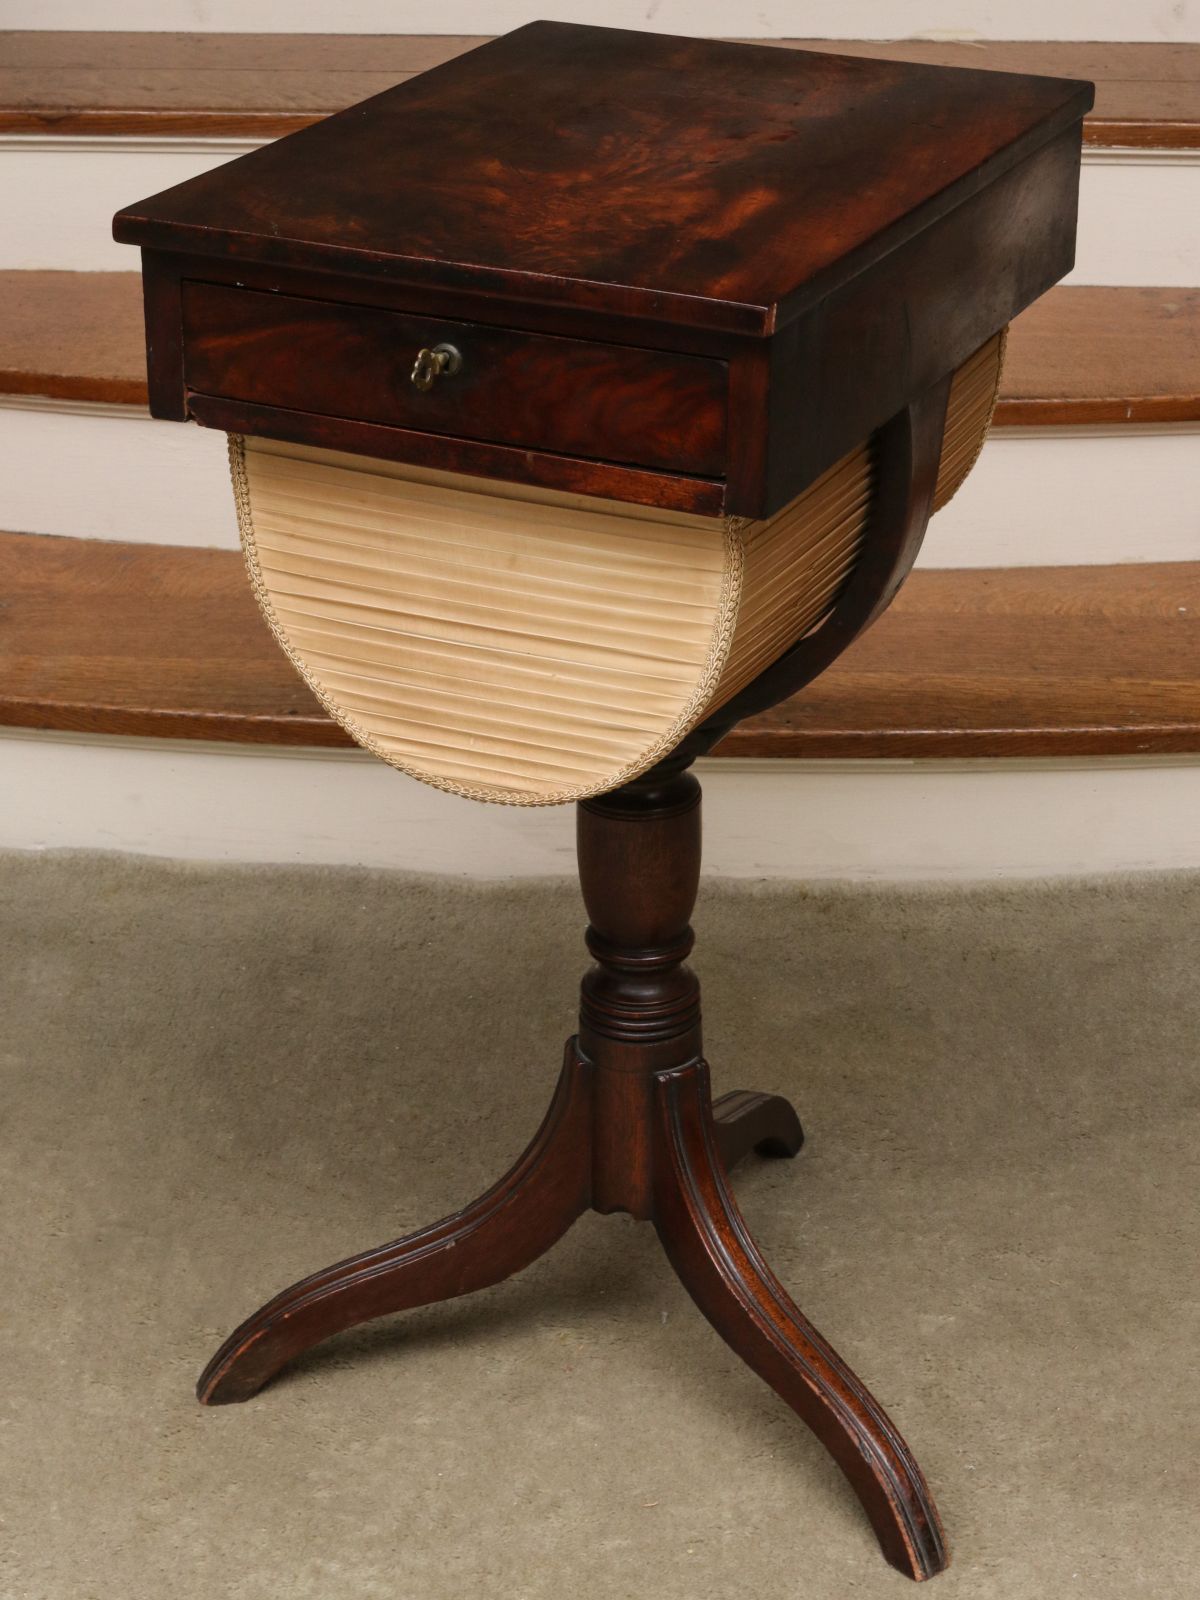 AN EARLY 19TH C. MAHOGANY REGENCY SEWING STAND